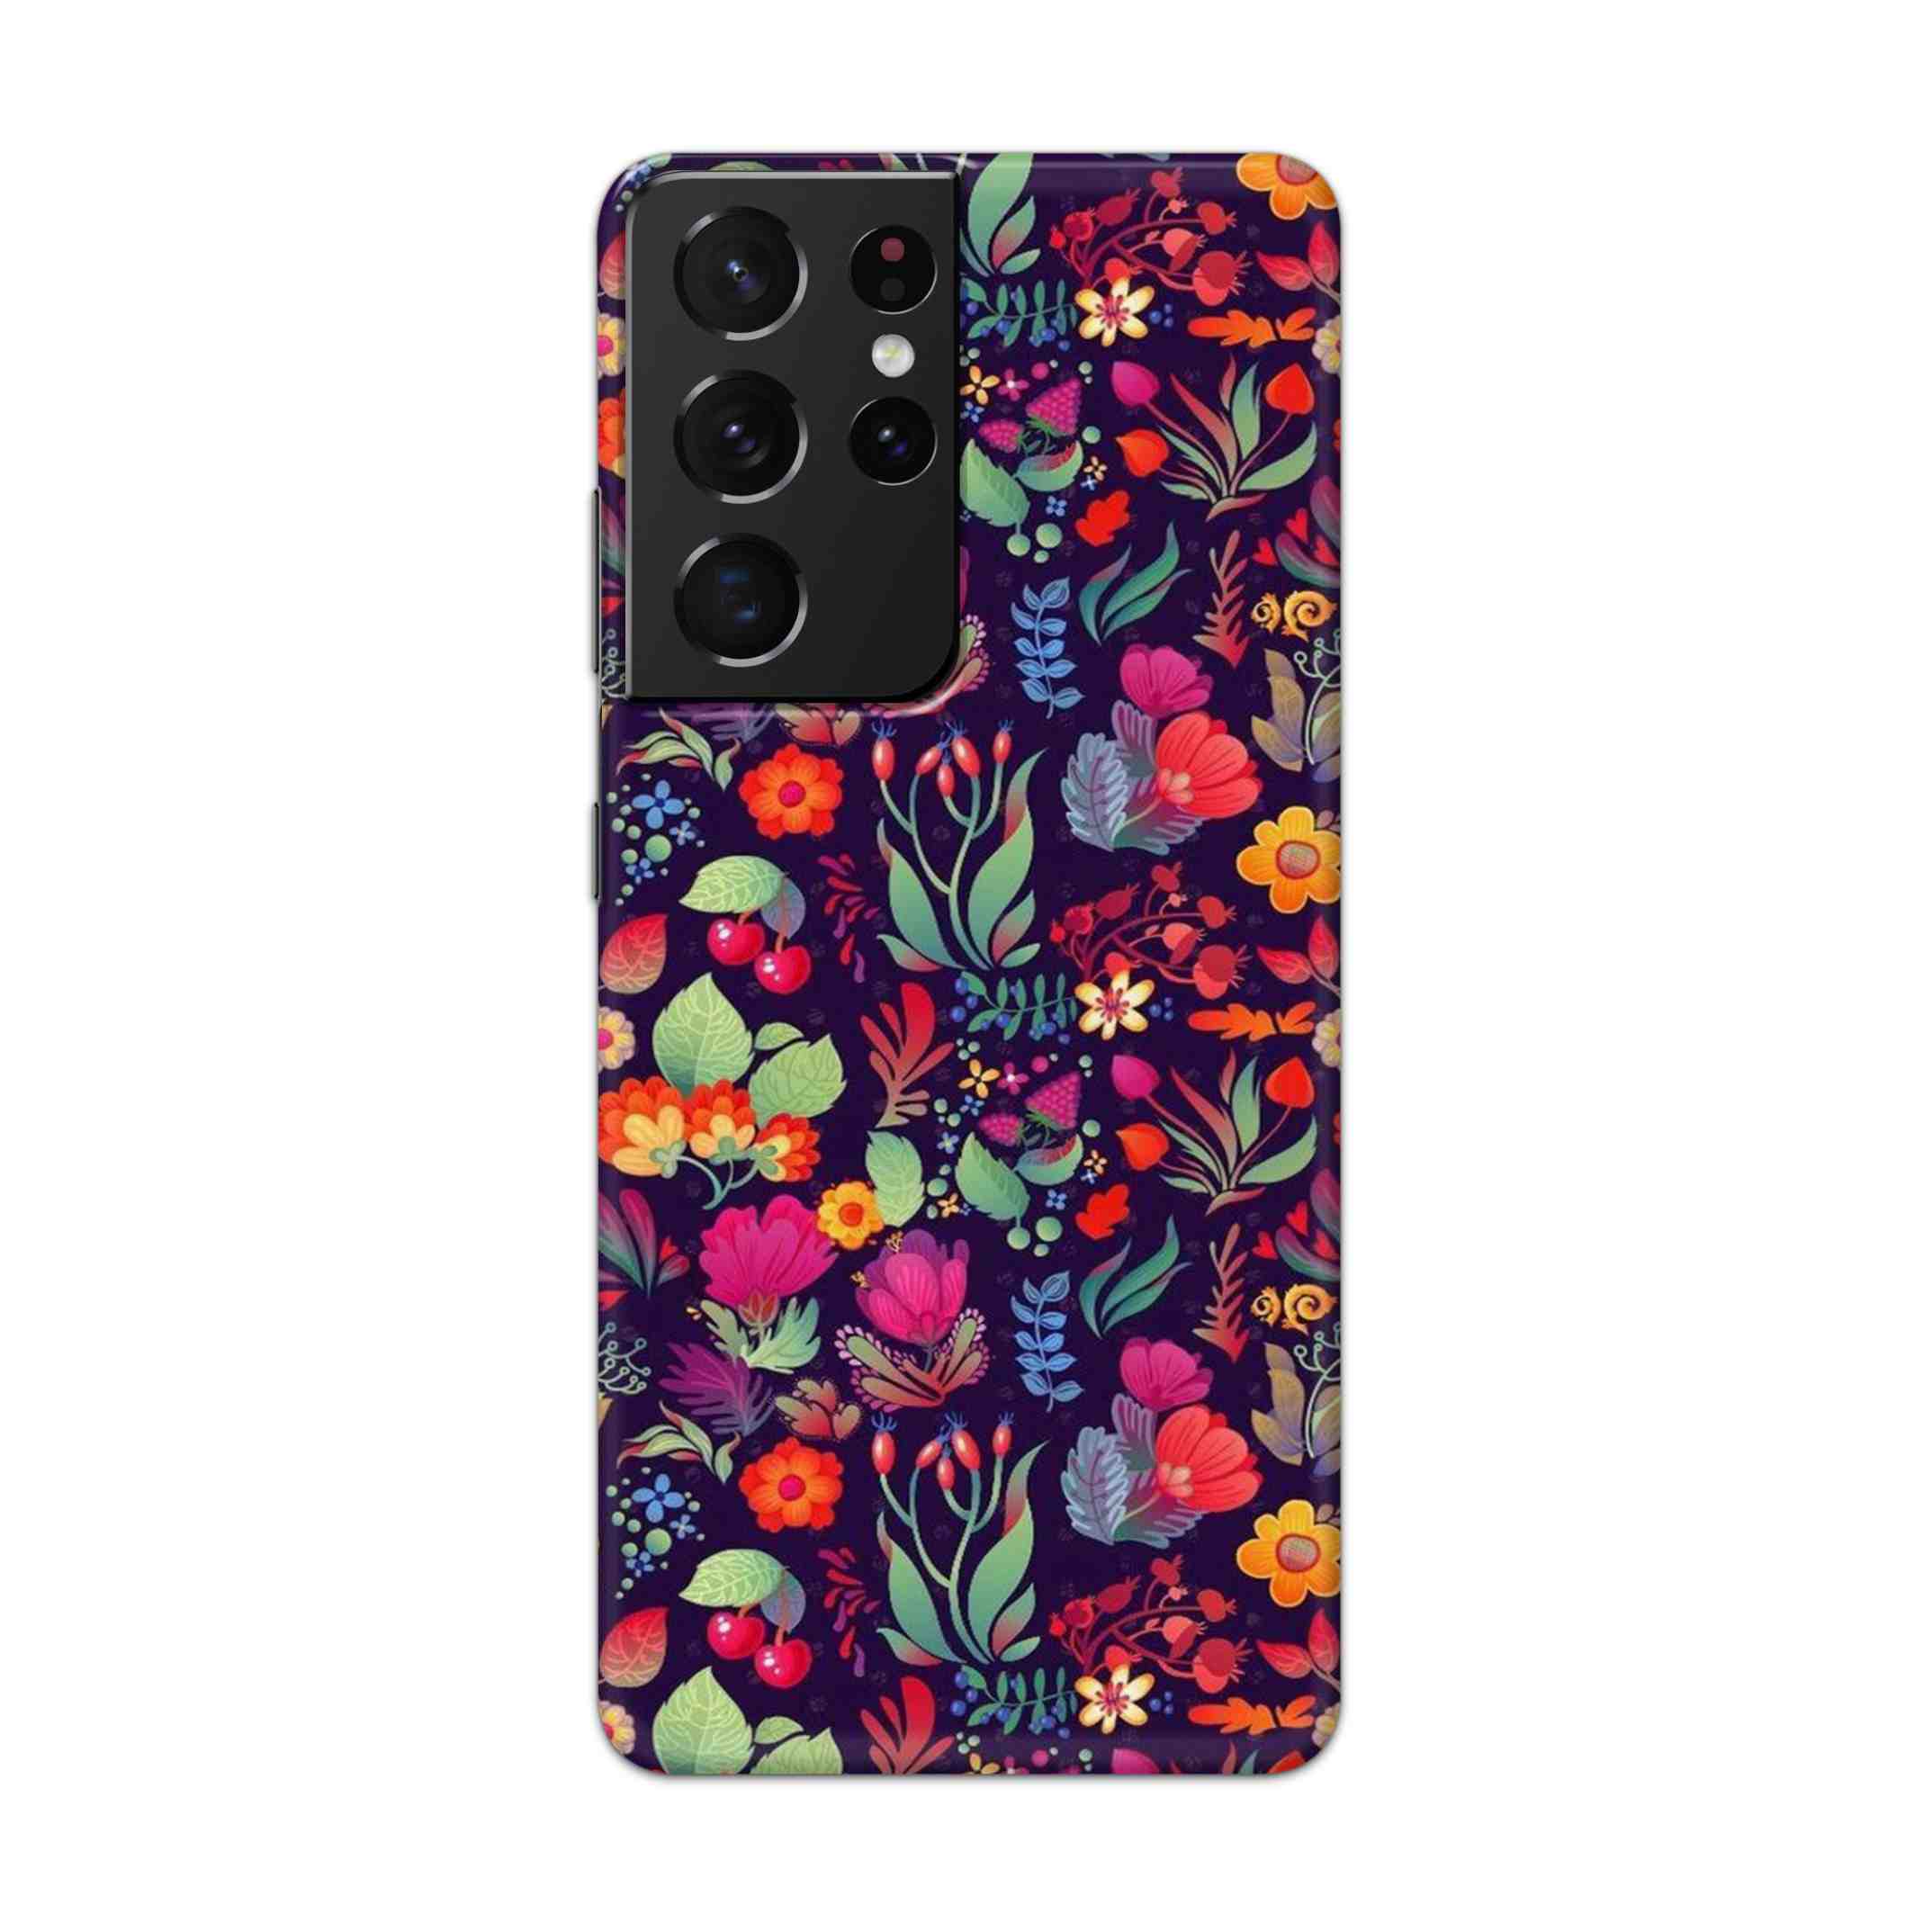 Buy Fruits Flower Hard Back Mobile Phone Case Cover For Samsung Galaxy S21 Ultra Online